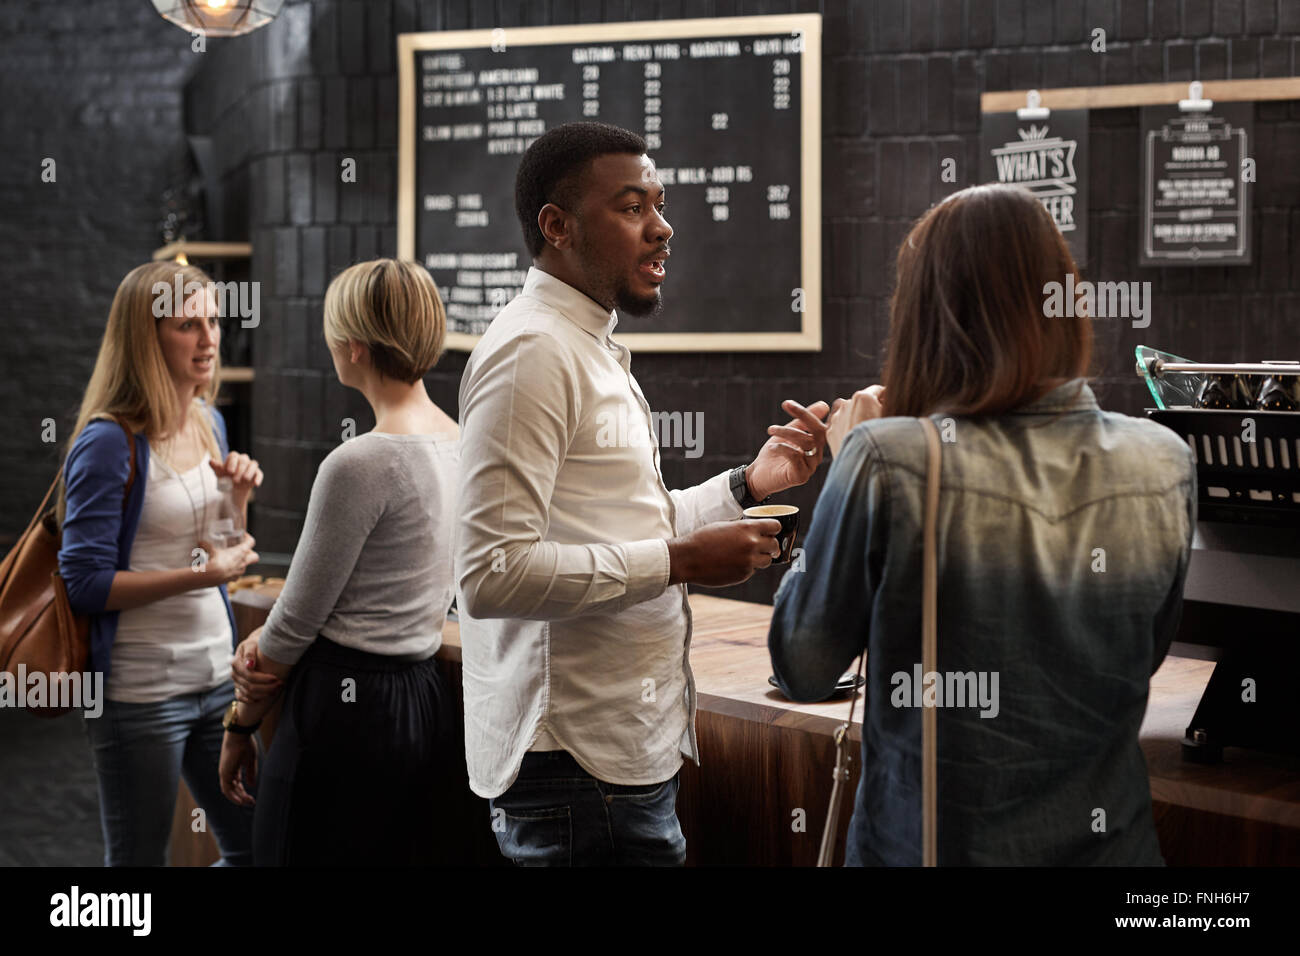 Mixed race friends talking at the counter of coffee shop Stock Photo